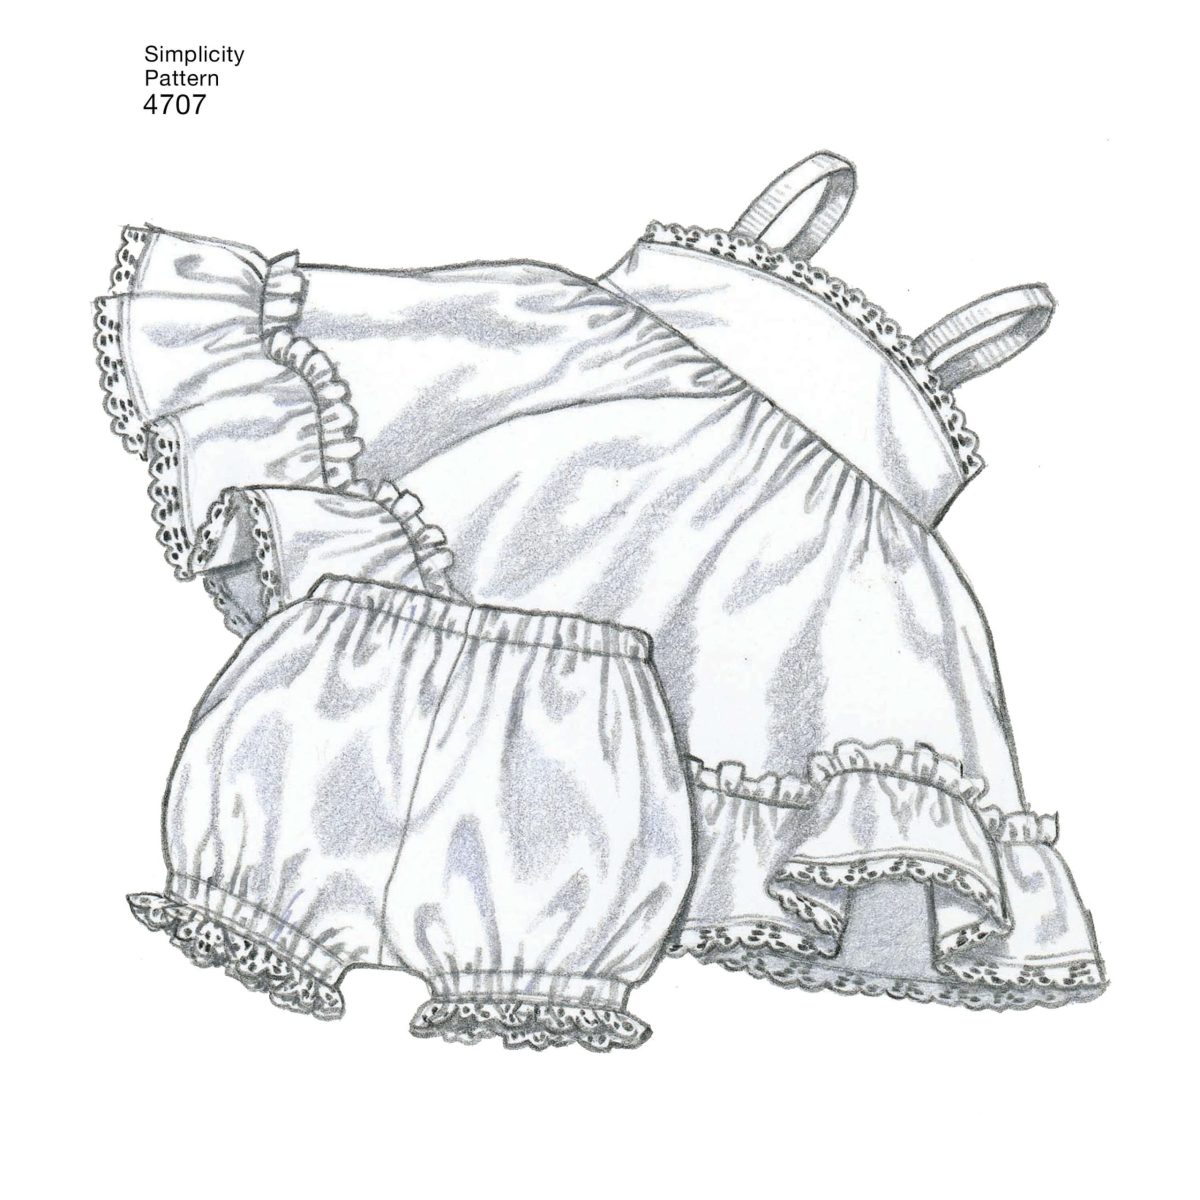 Simplicity Sewing Pattern 4707 15" Baby Doll Clothes